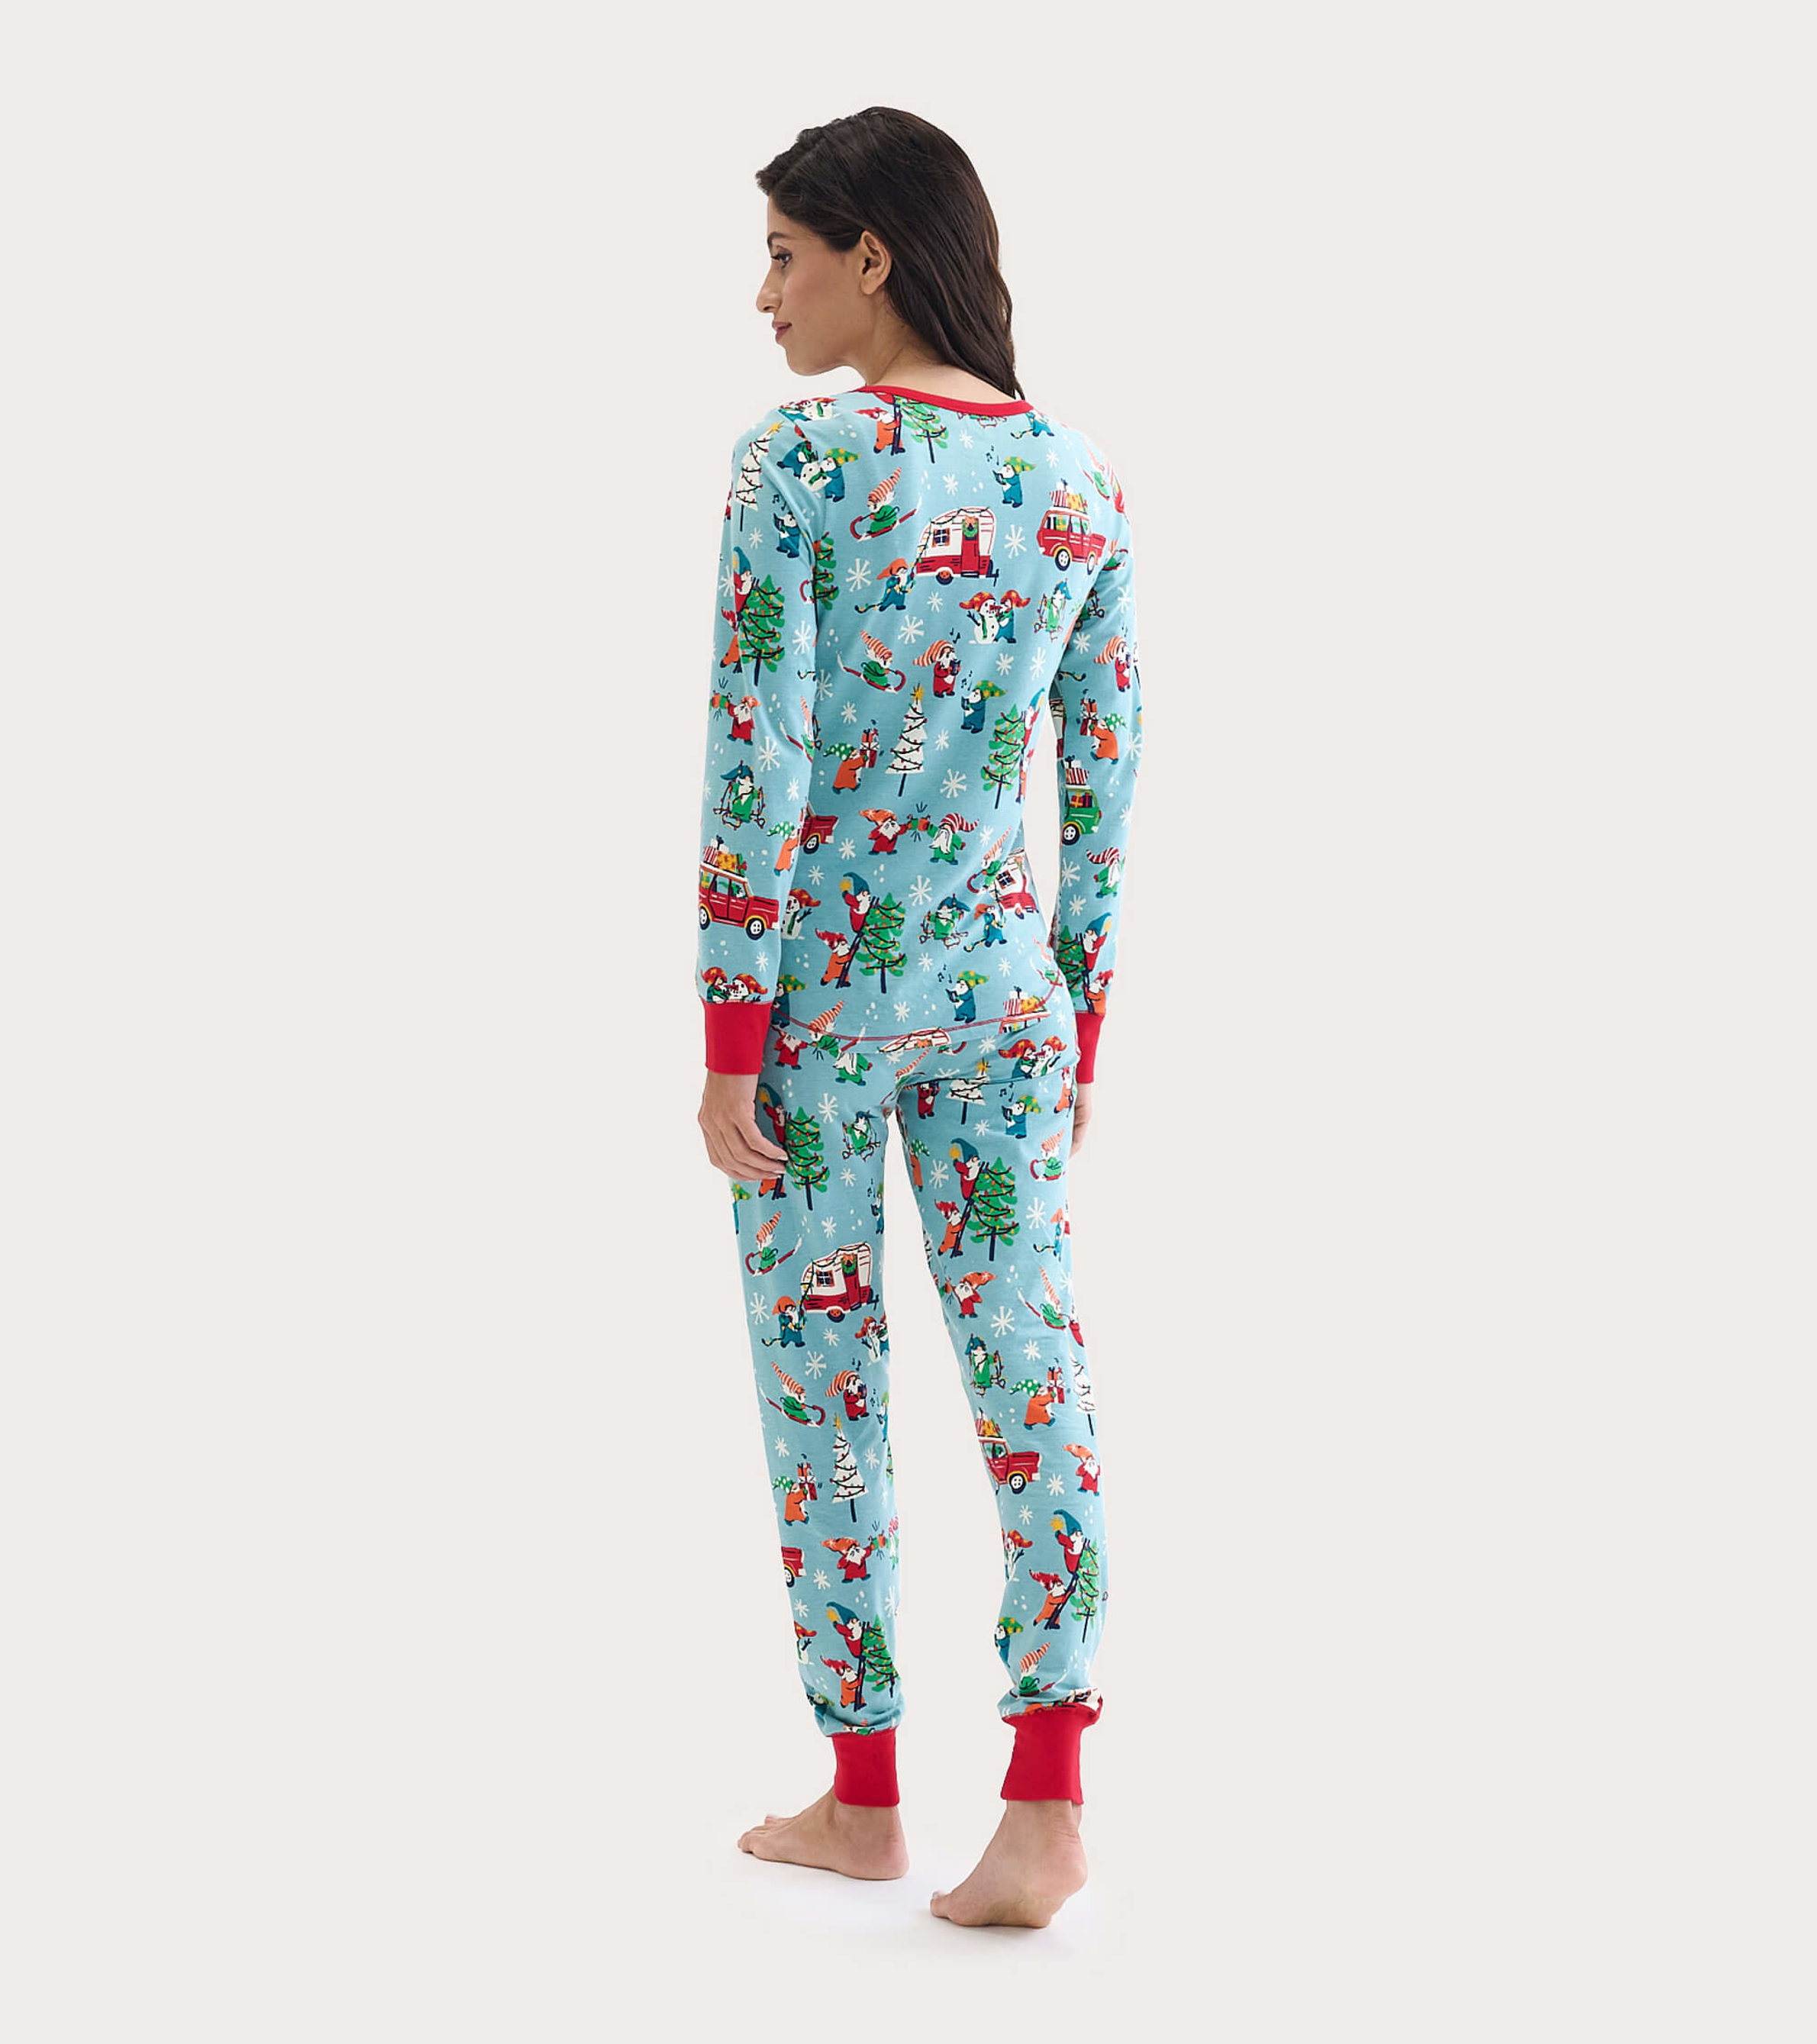 https://cdn.littlebluehouse.com/product_images/gnome-for-the-holidays-womens-jersey-pajama-set/PJBGNOM002_B_jpg/pdp_zoom.jpg?c=1666734986&locale=us_en